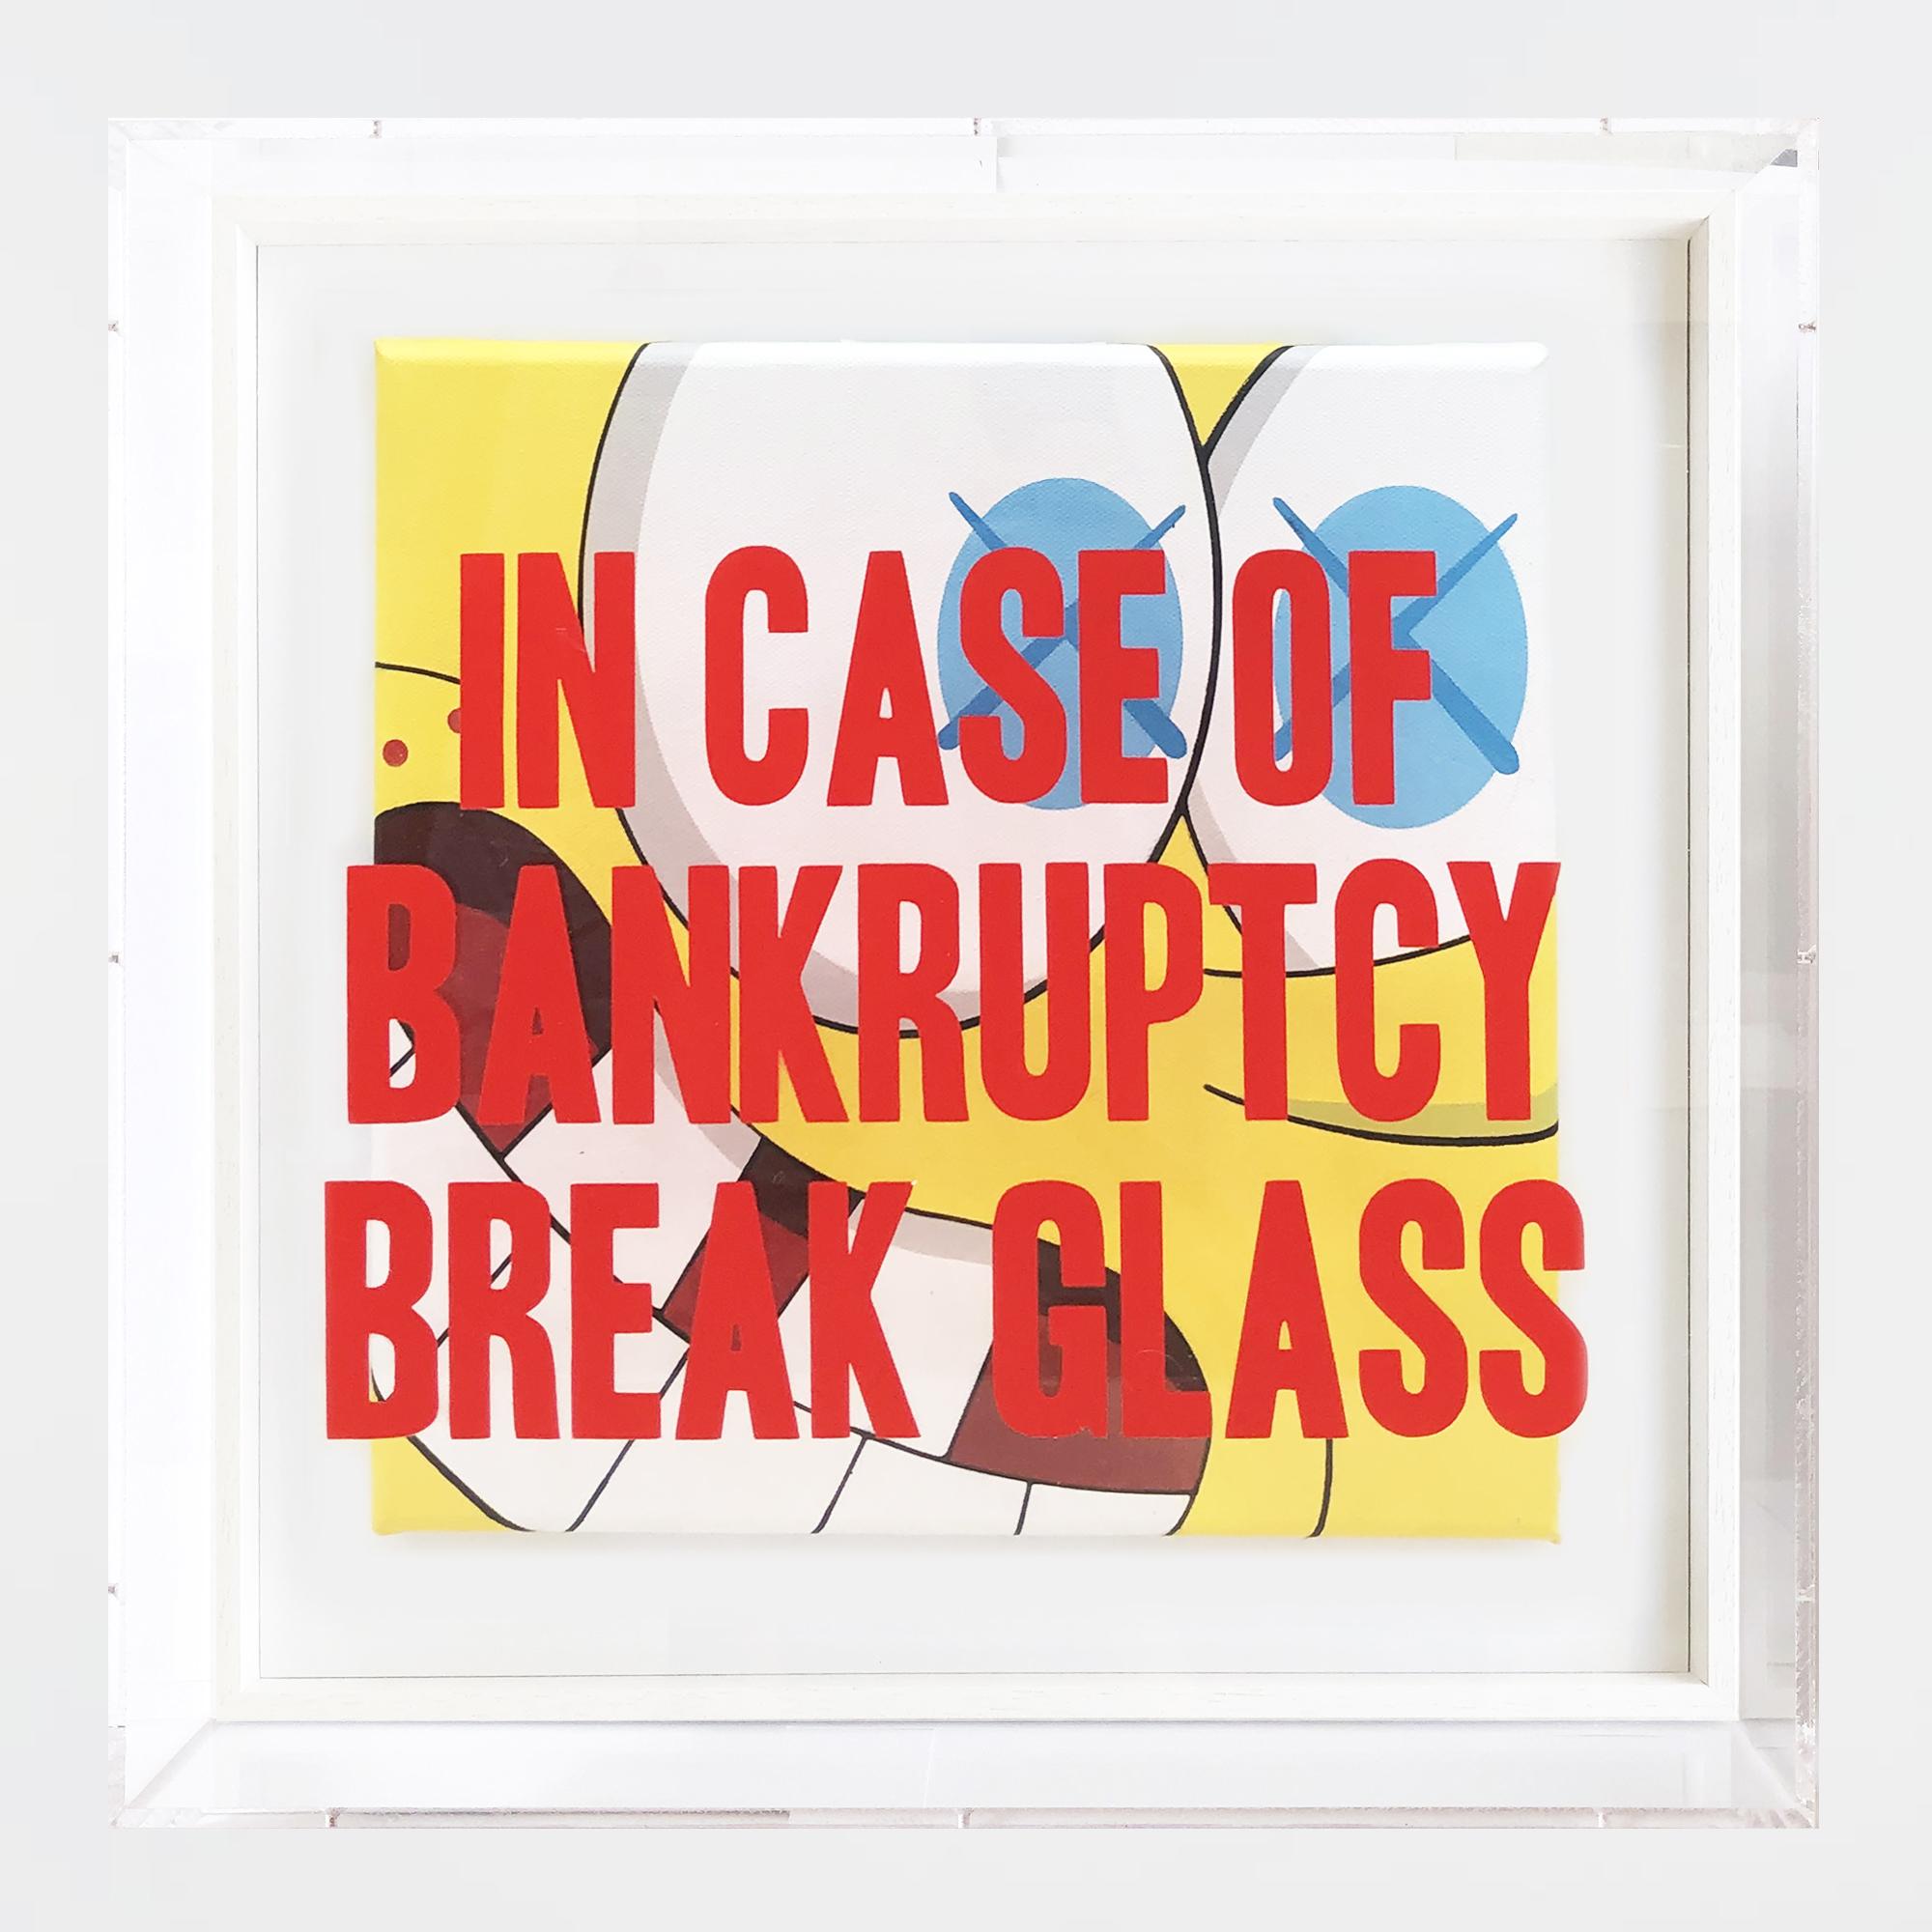 "In Case Of Bankruptcy - Kaws Spongebob"   - Mixed Media Art by Thirsty Bstrd